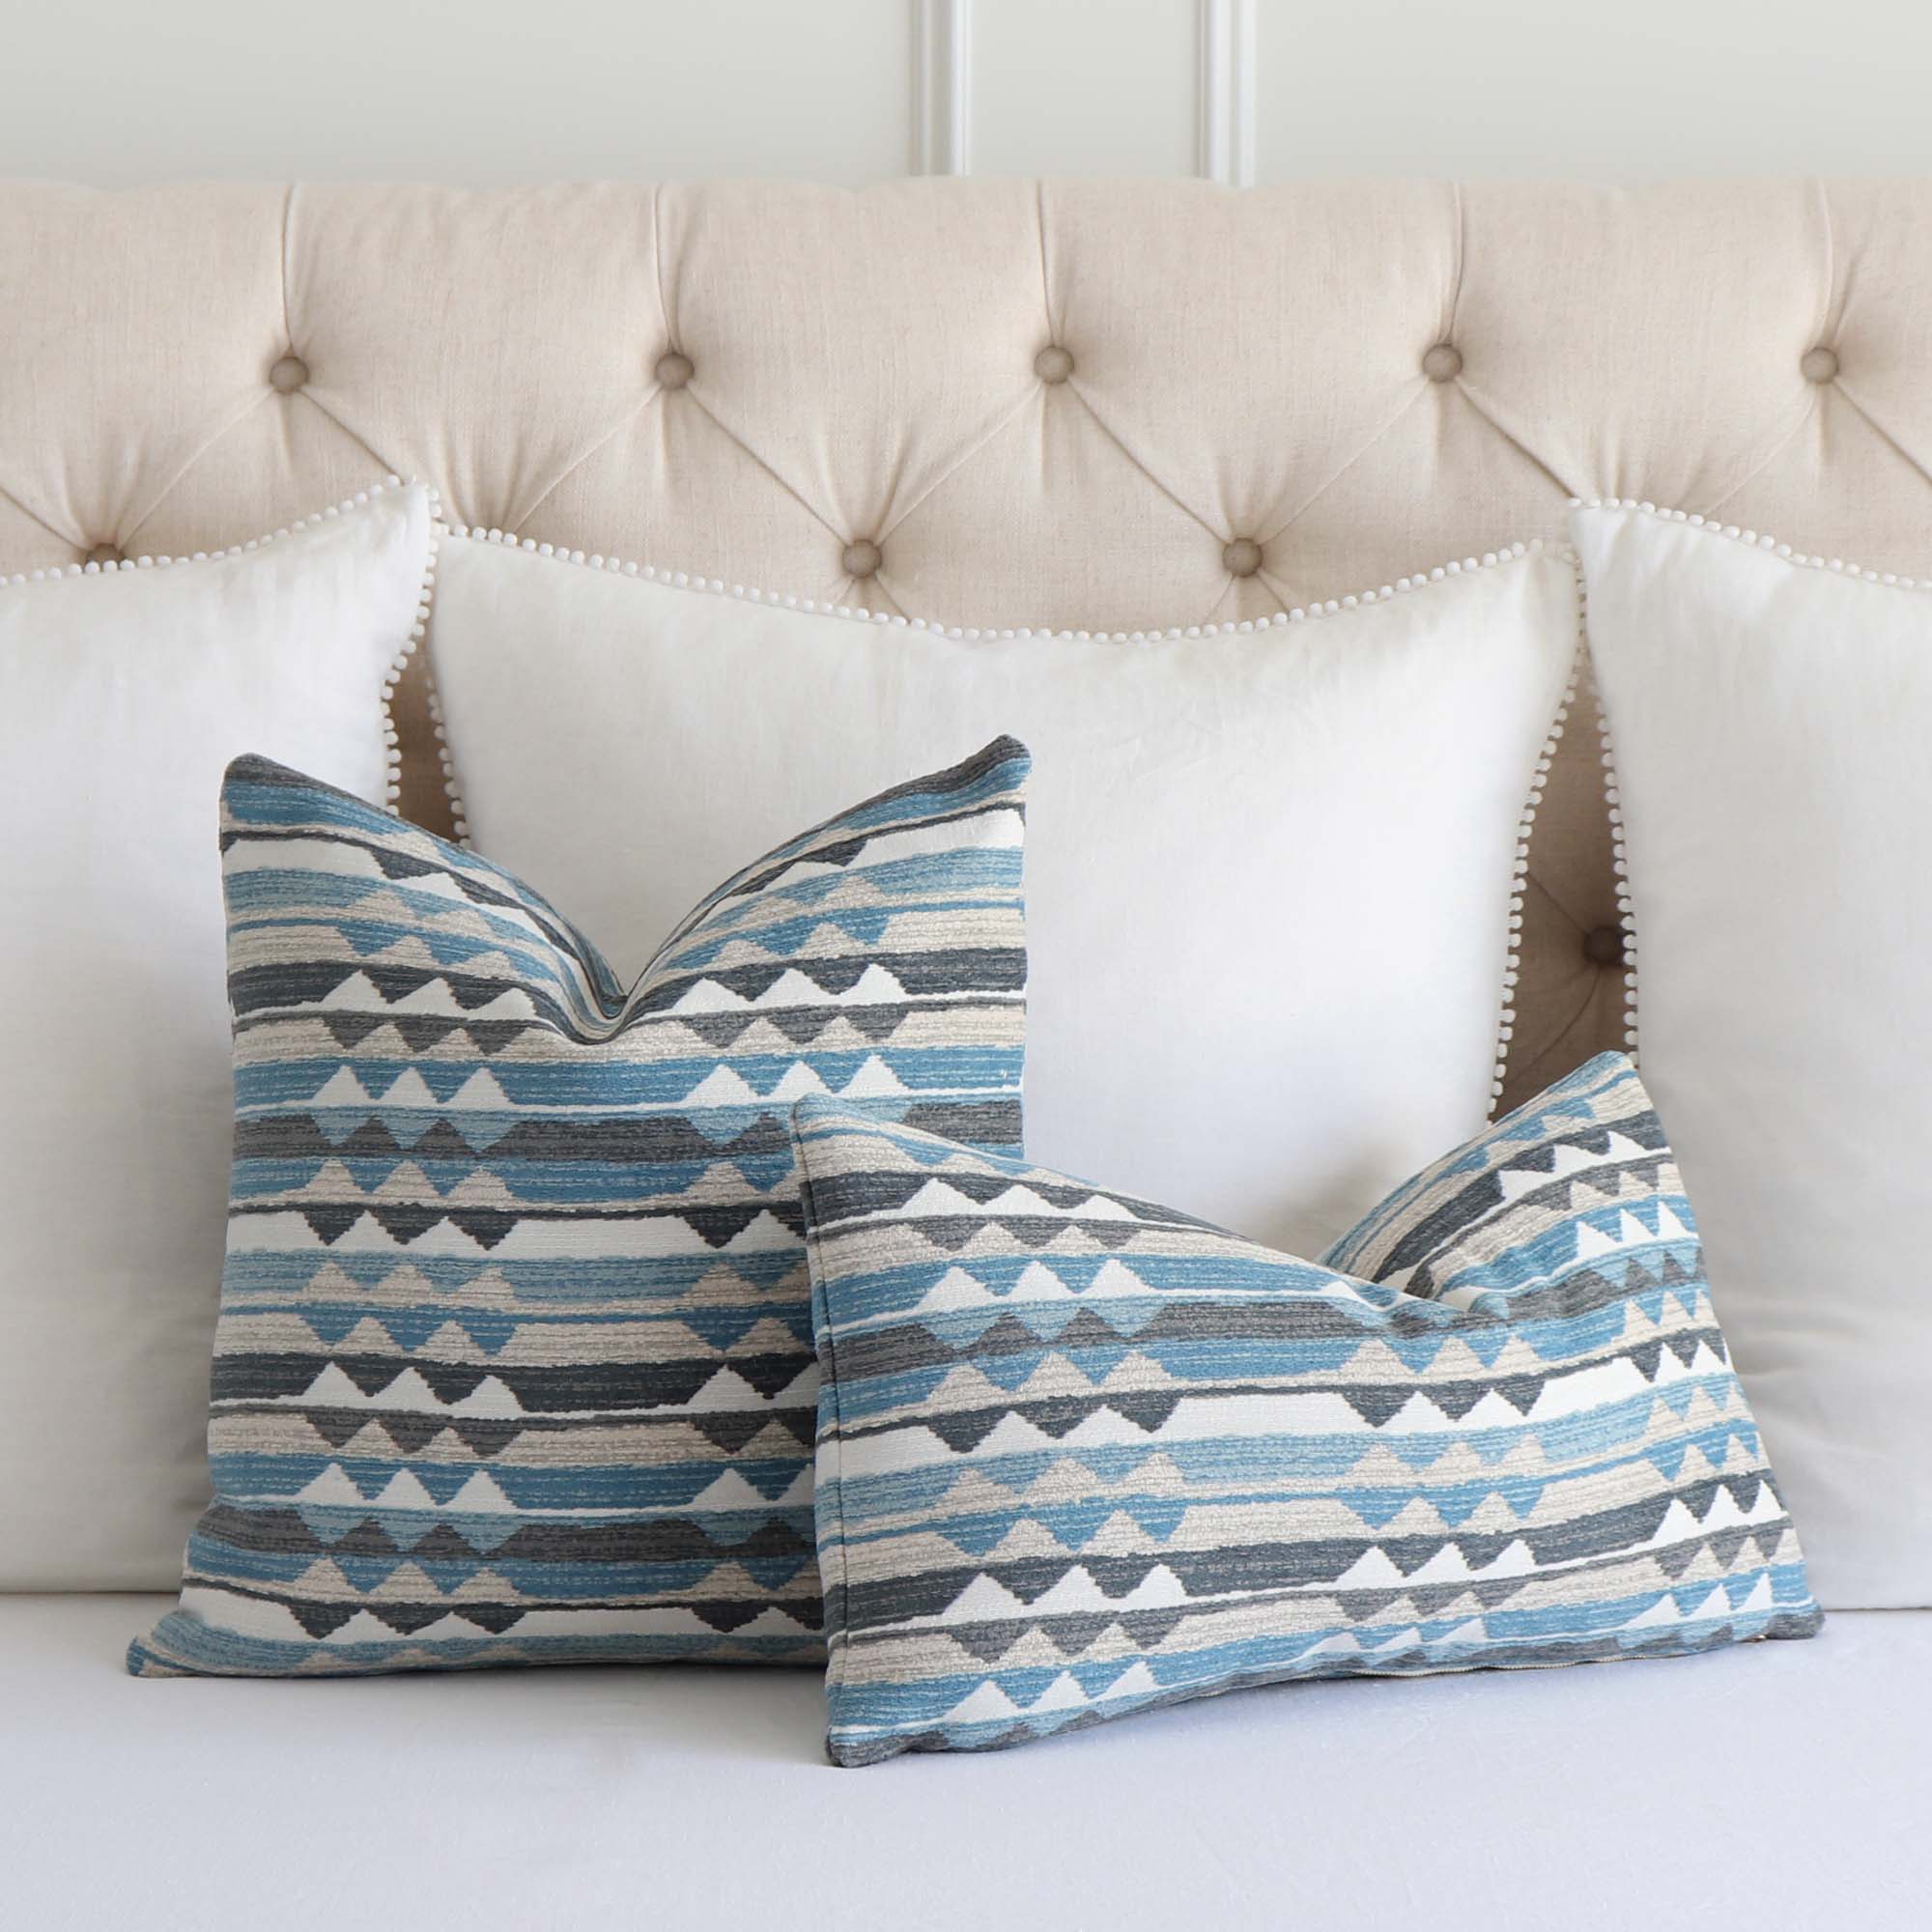 Thibuat Performance Fabric Waterfall Blue Woven Ikat Kilim Pattern Designer Luxury Throw Pillow Cover on Bed